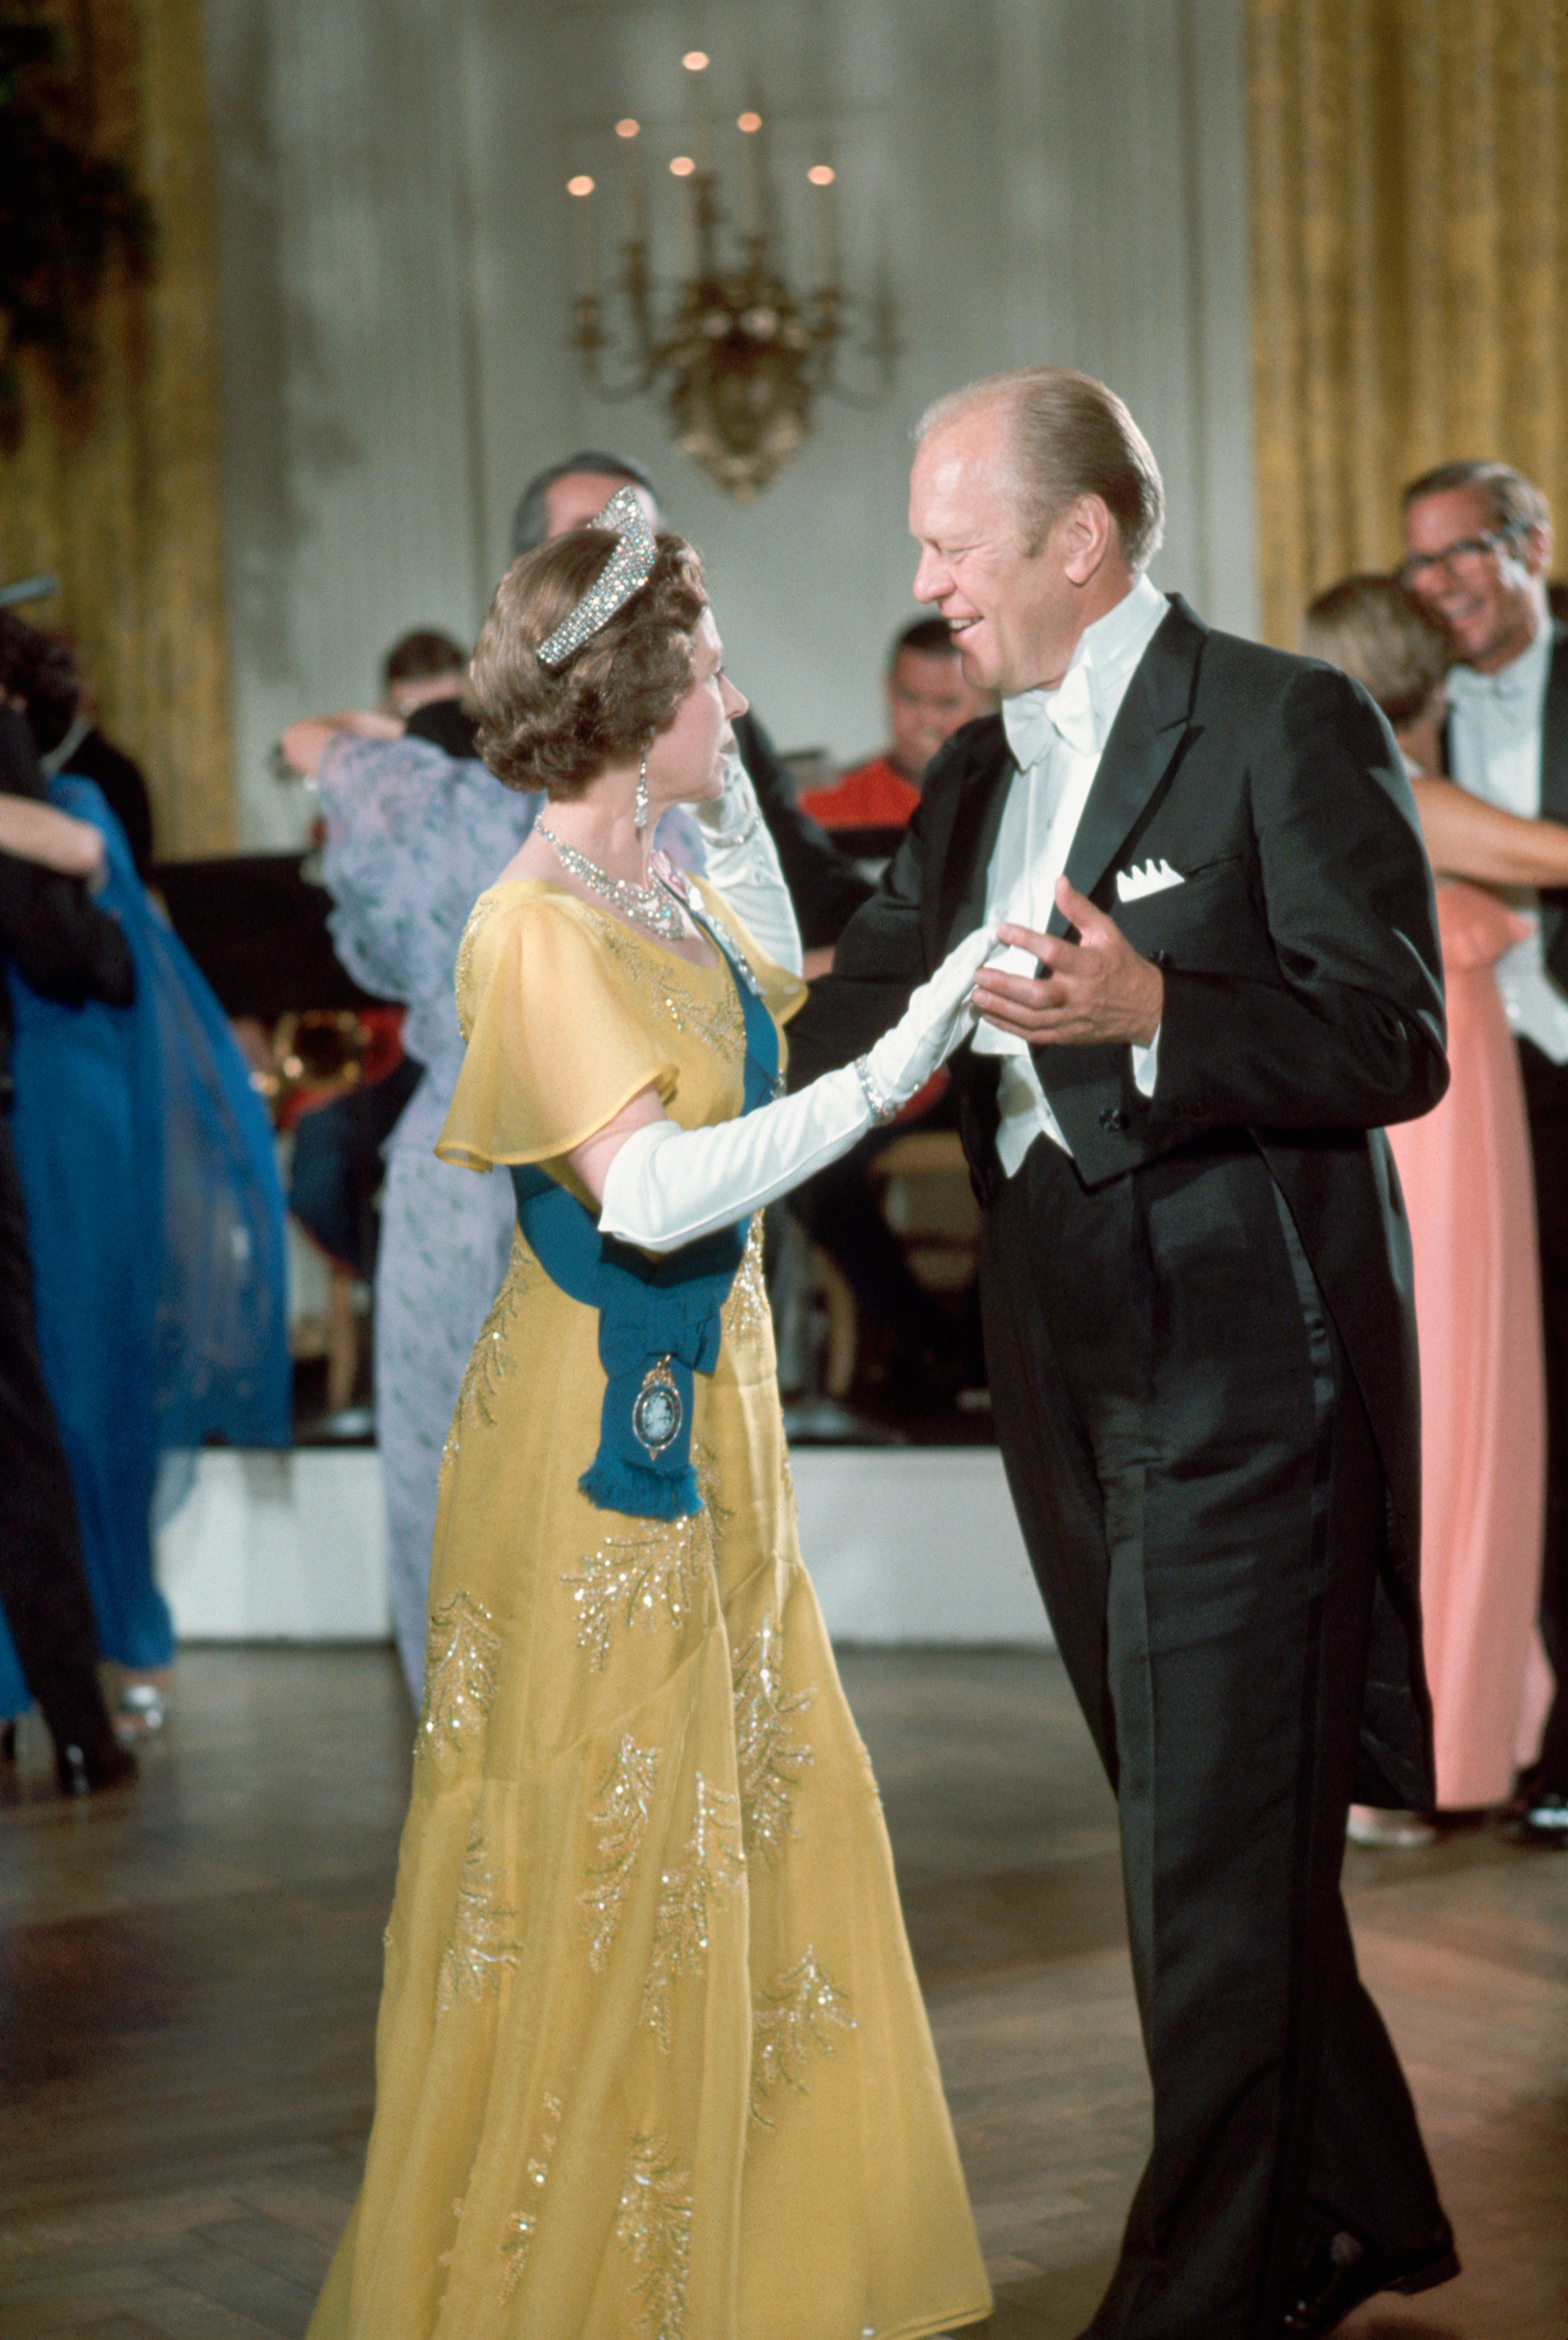 President Ford Dancing with Queen Elizabeth